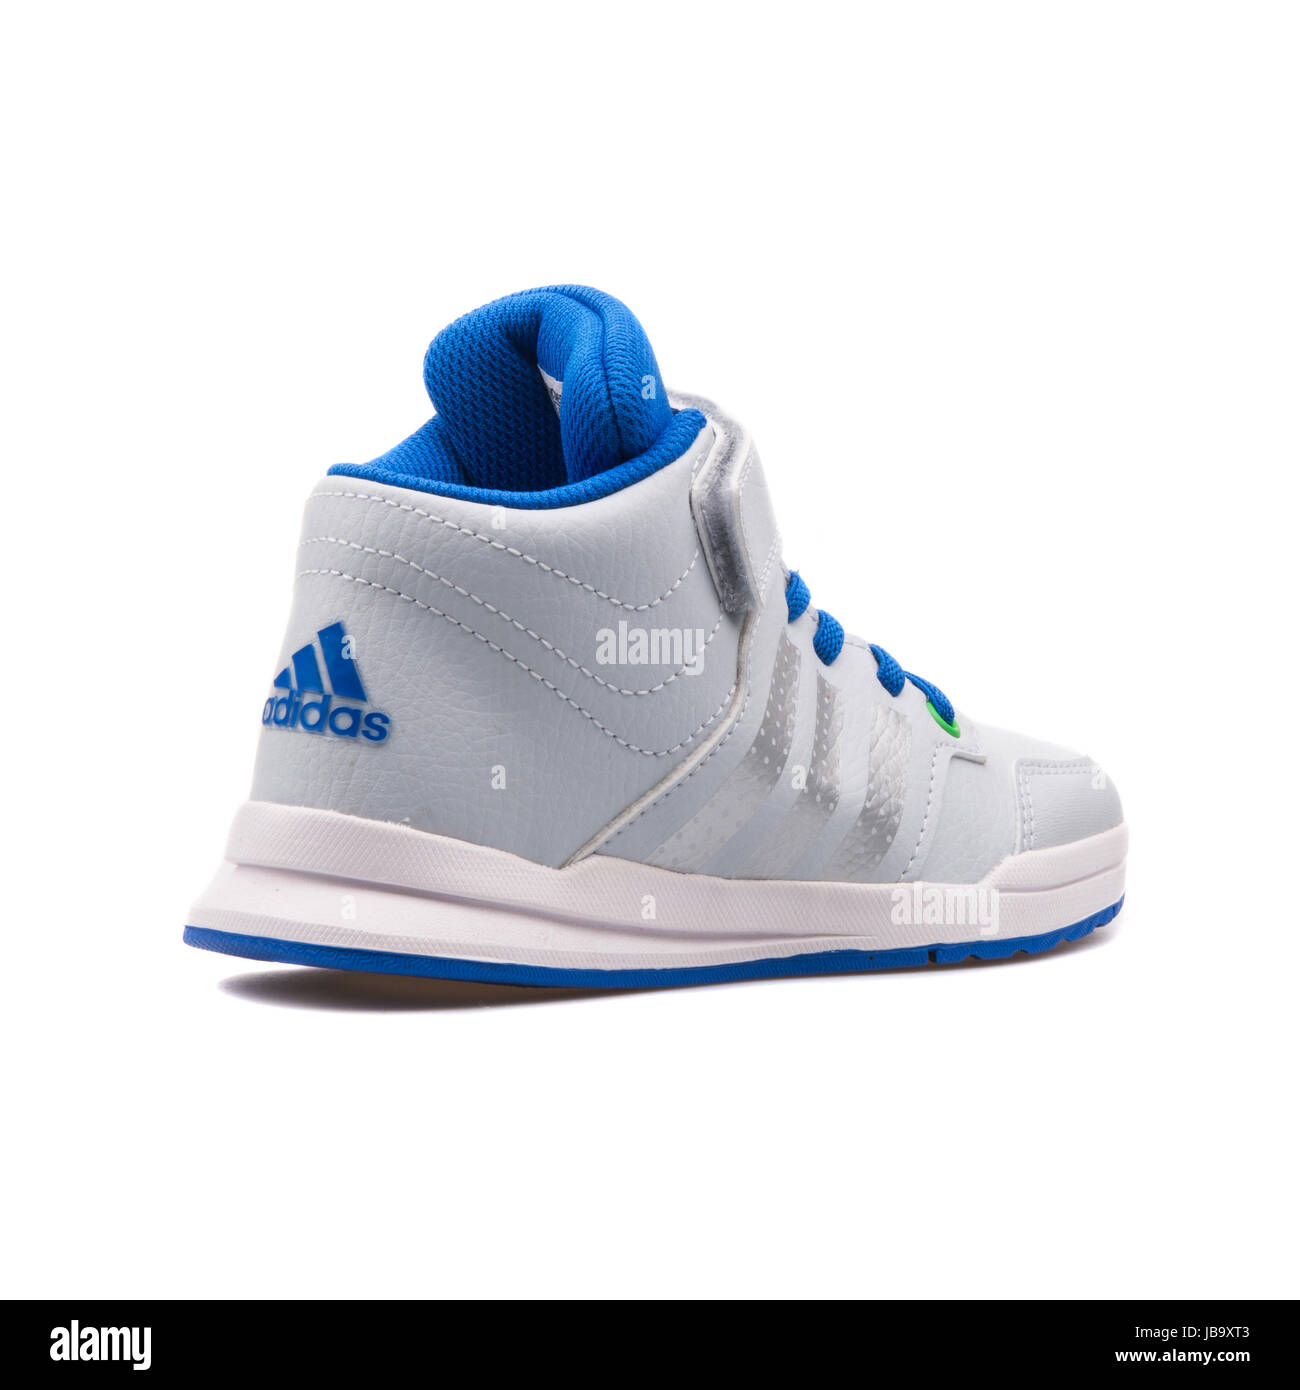 Adidas Jan BS 2 mid C Silver and Blue 